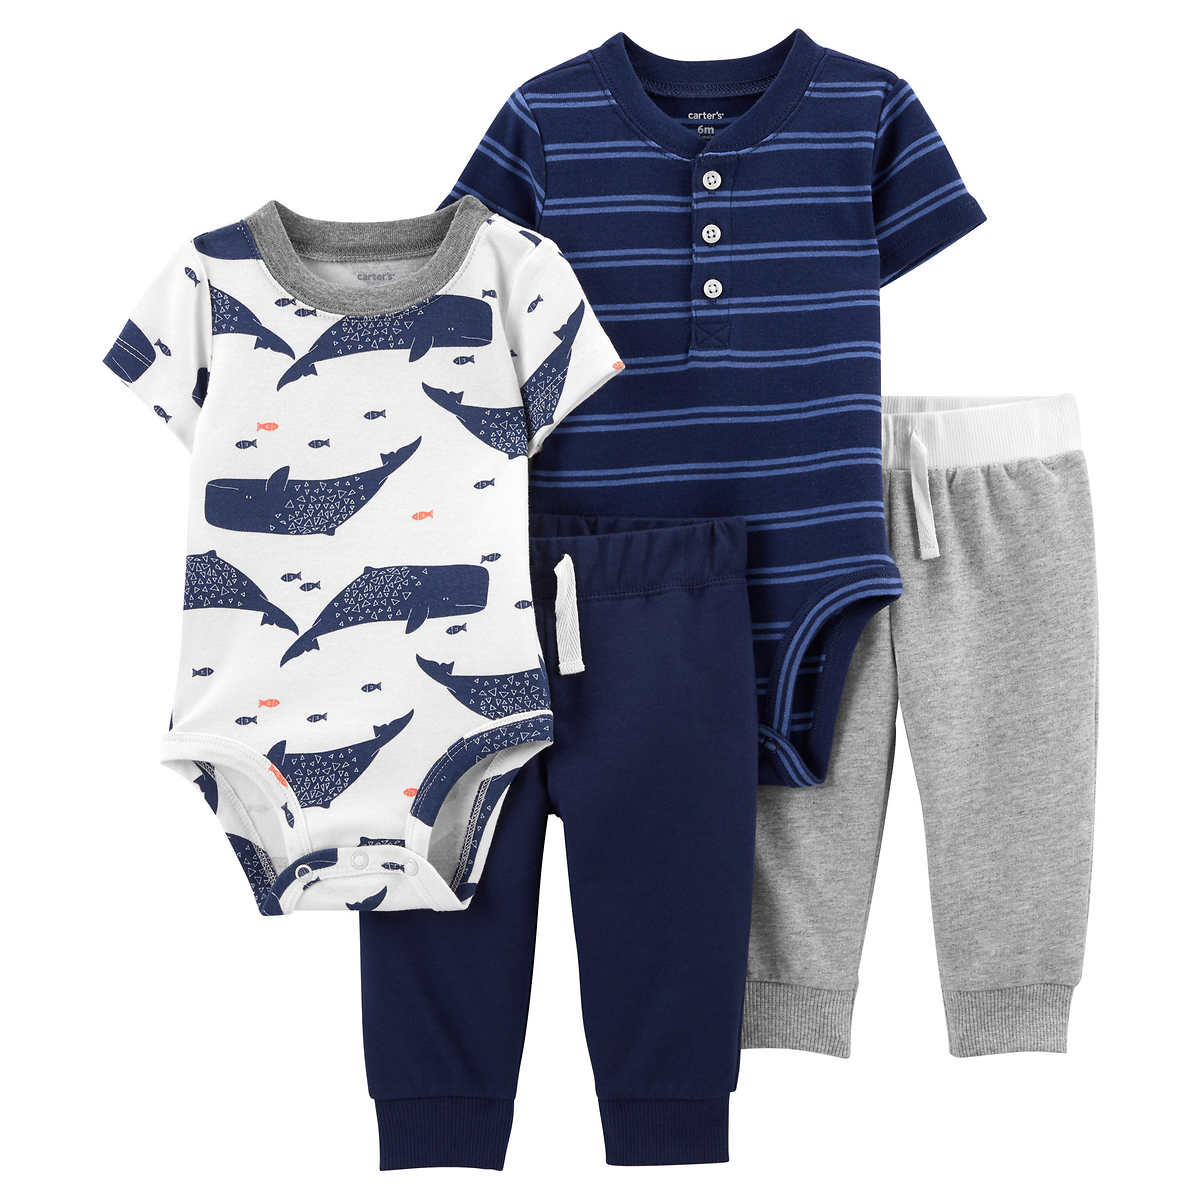 Carter's Infant 4-piece Layette Set, Blue or Green